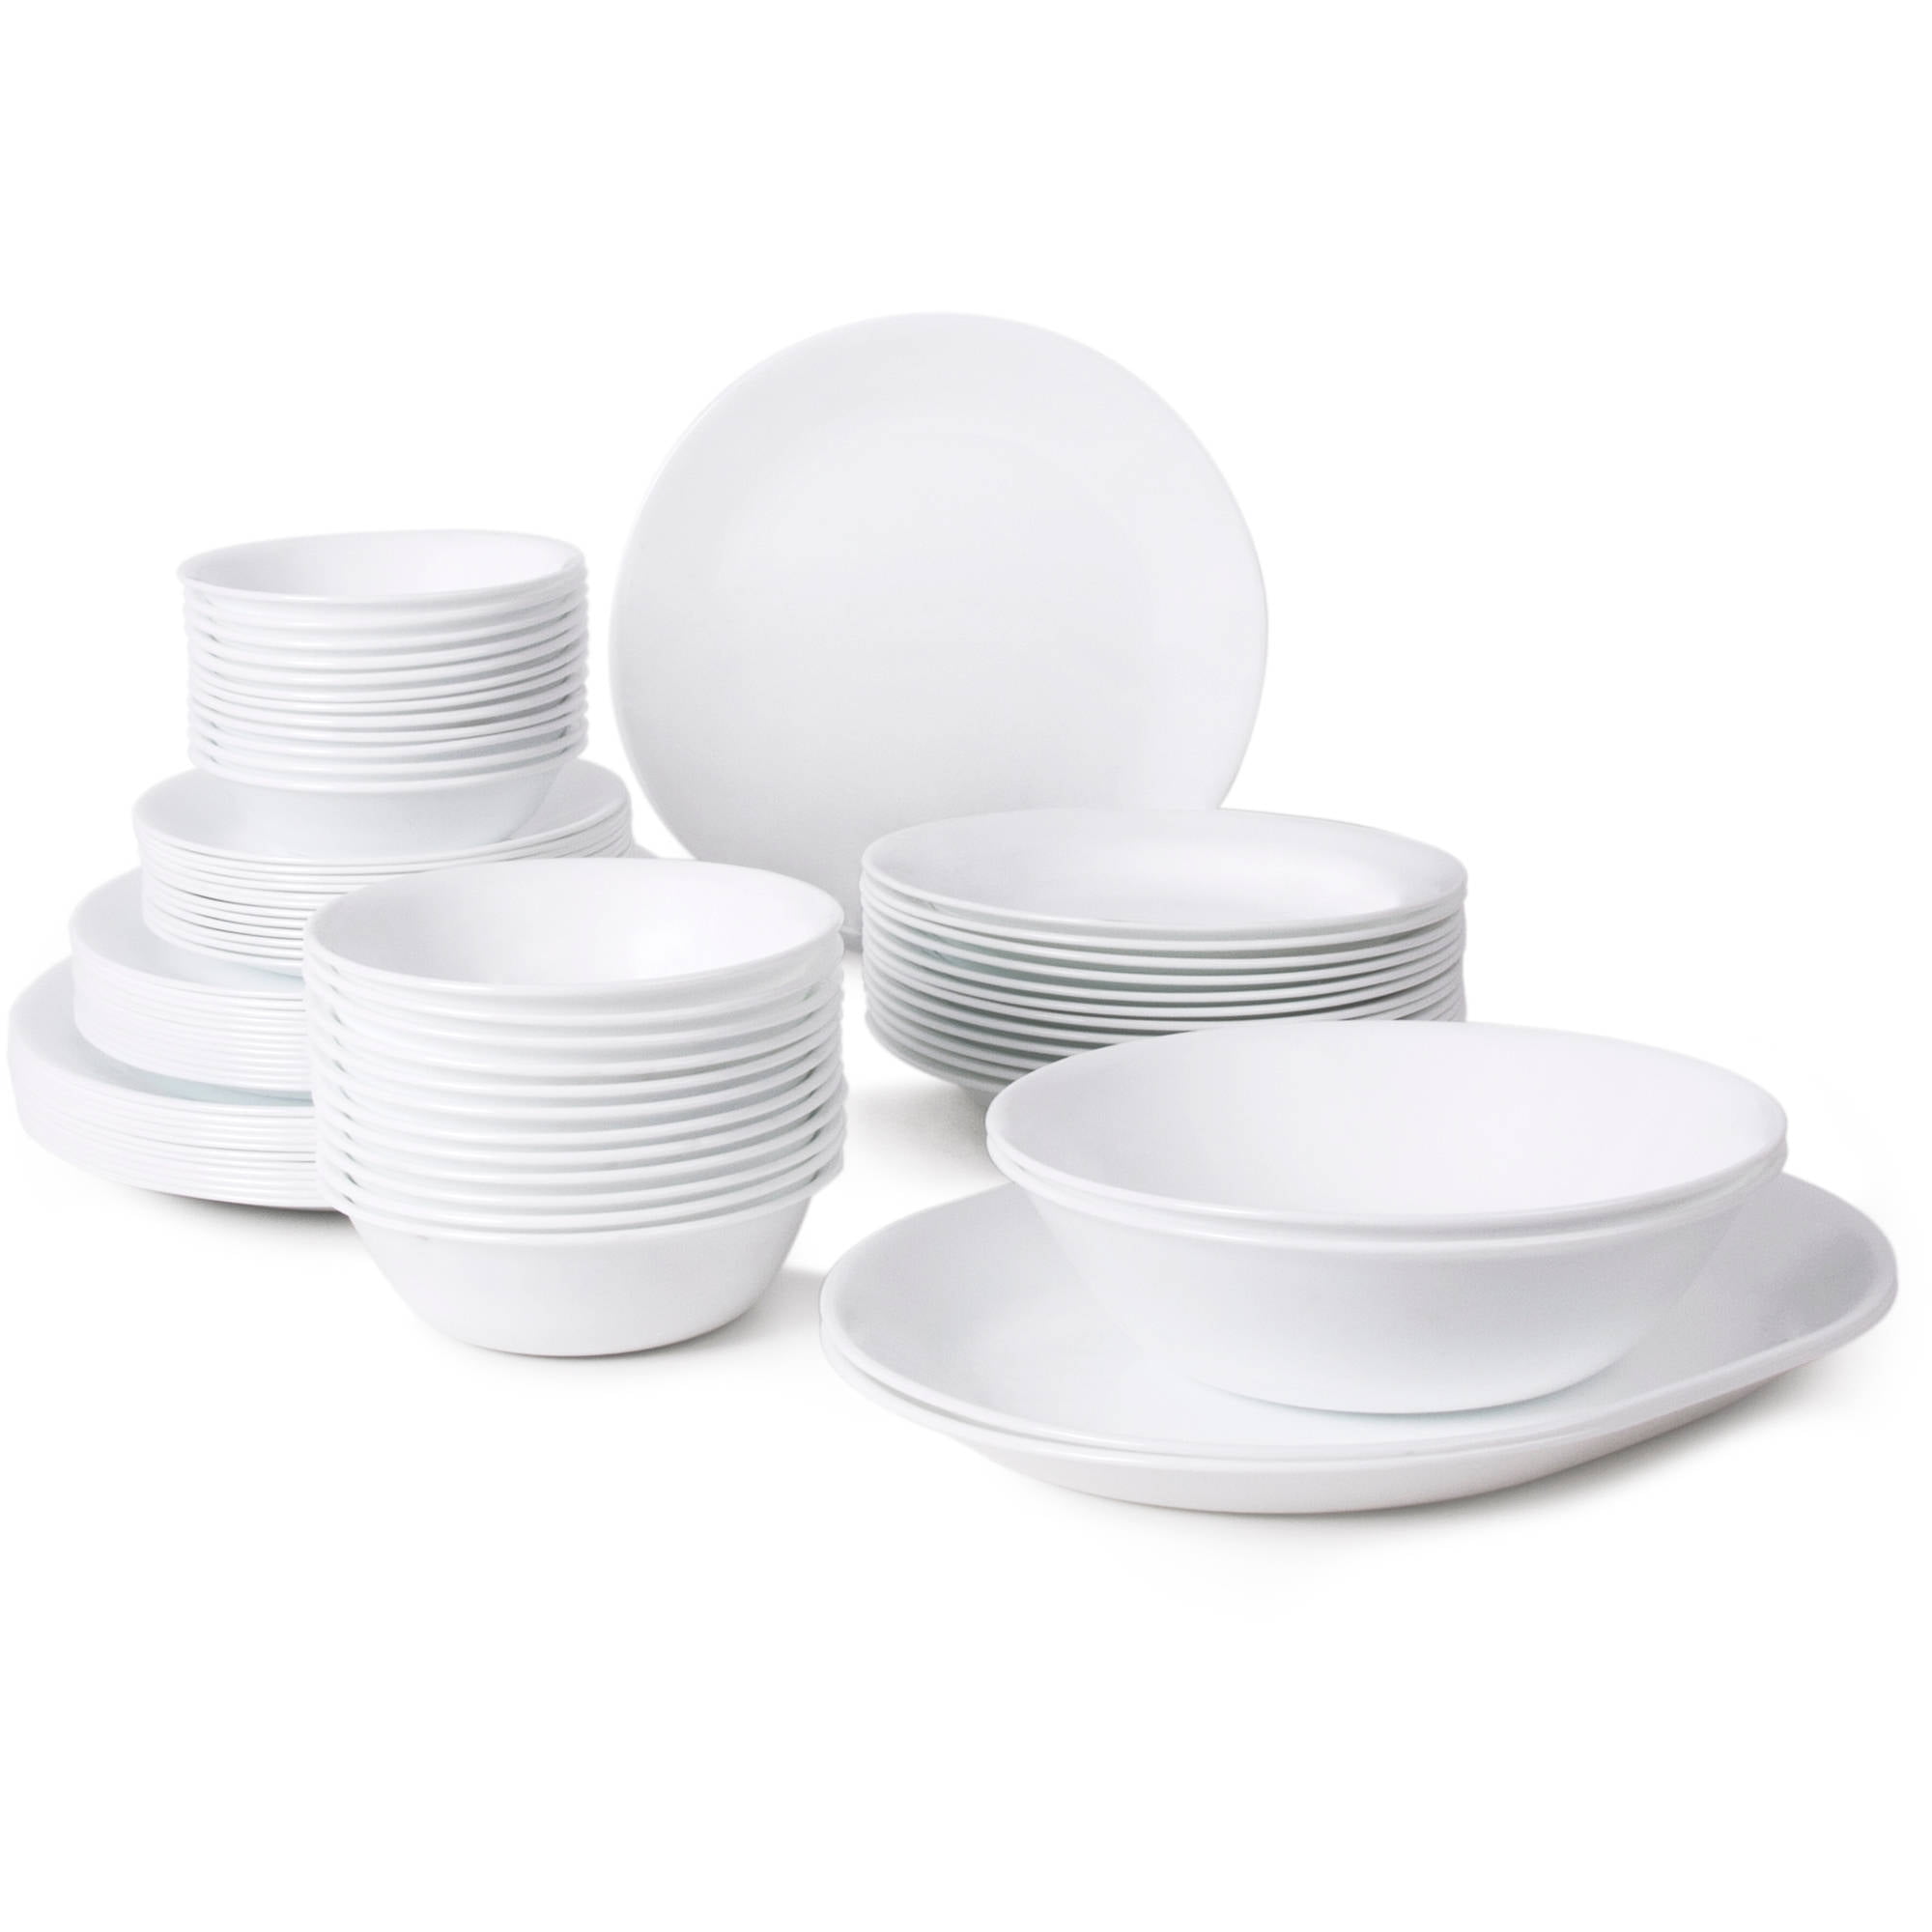 Clearance Dinner Plates & Marvelous Kitchen Plates And Bowls Set Discount Kitchen Dishes Dinner ...